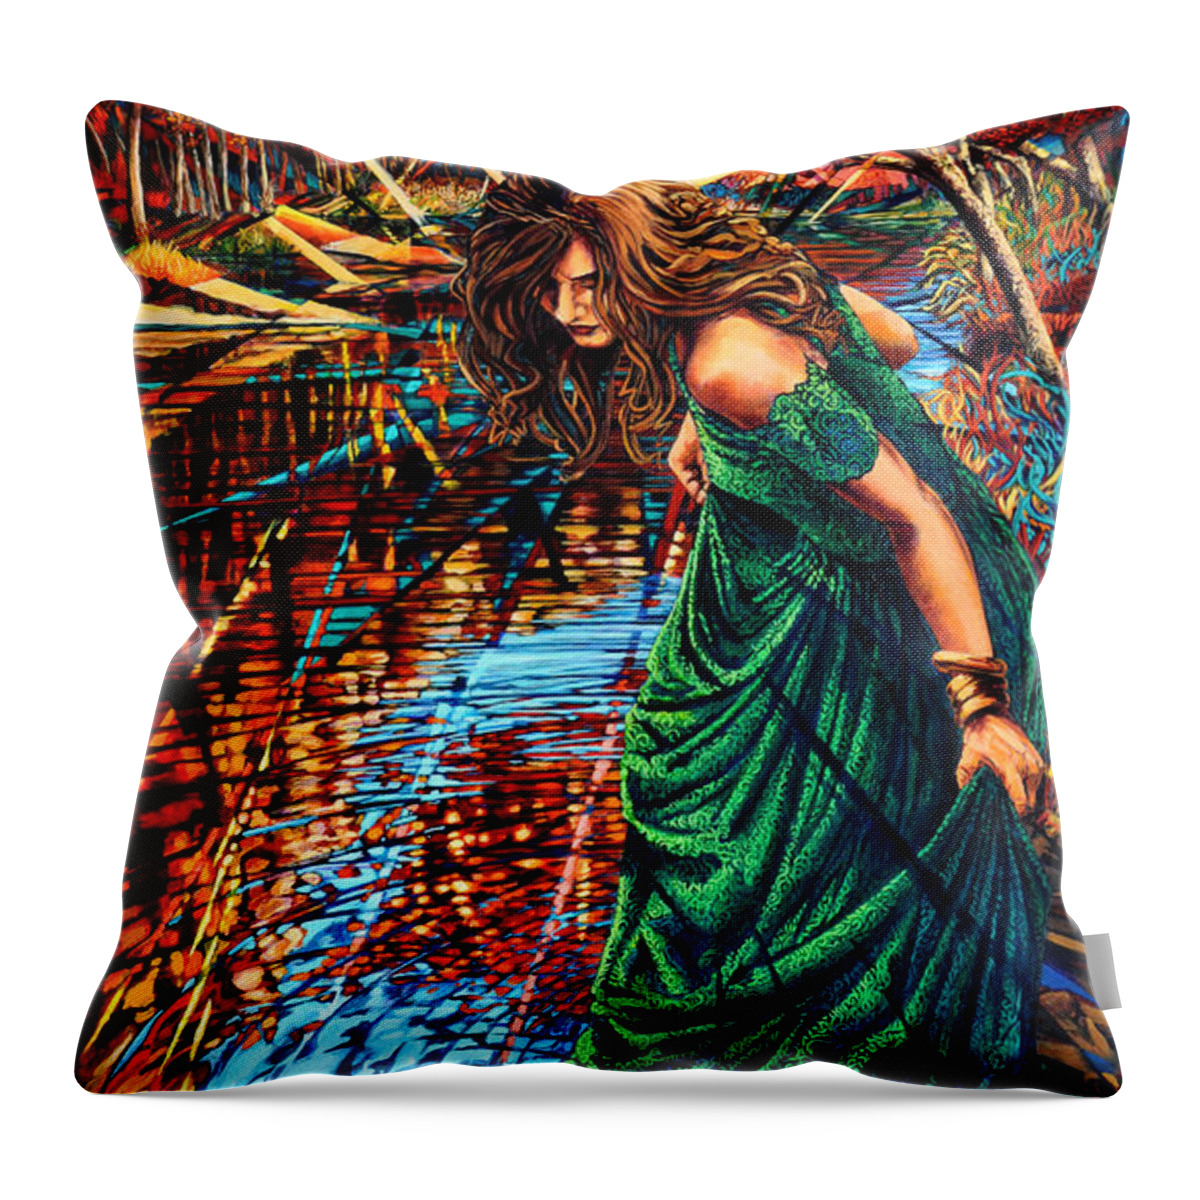 Girl Throw Pillow featuring the painting The World Unseen by Greg Skrtic